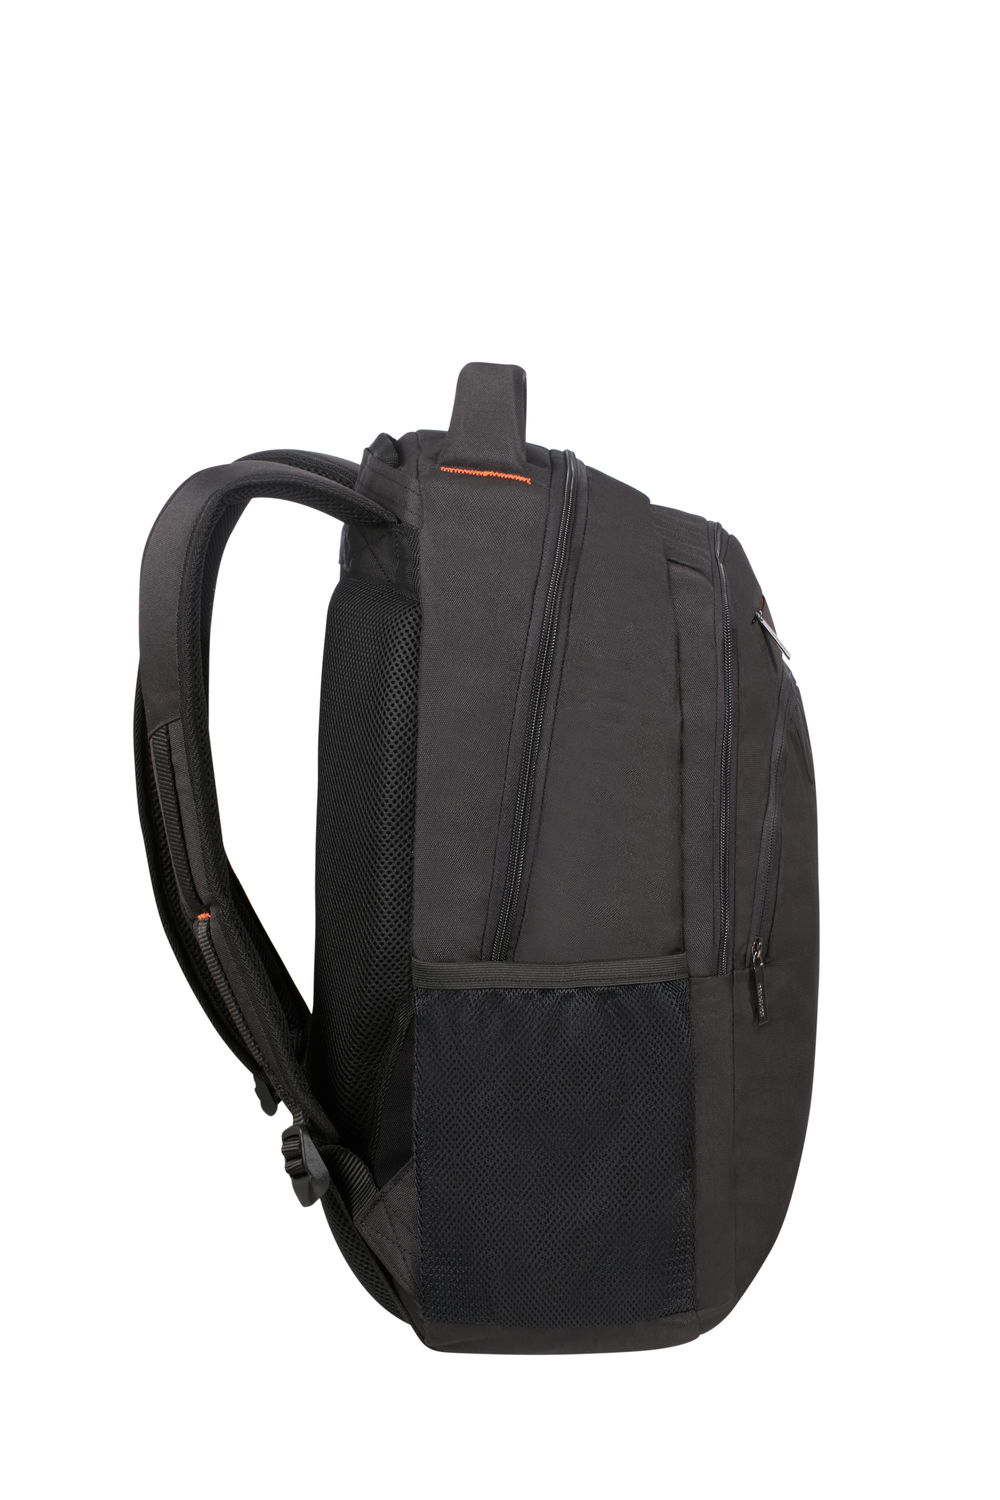 AT WORK LAPTOP BACKPACK 17.3